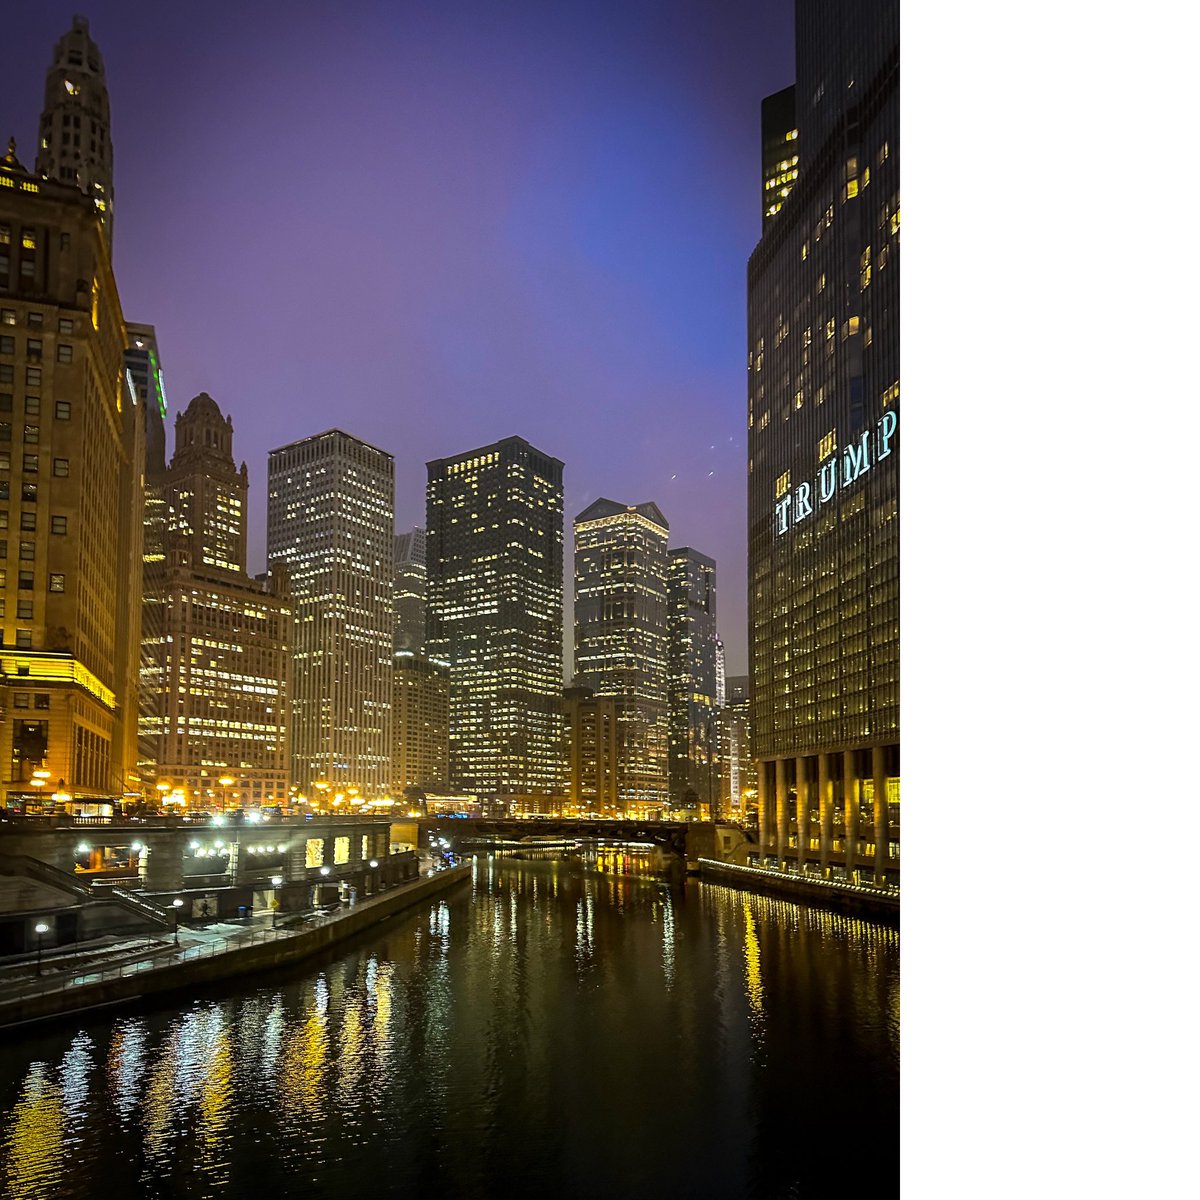 Day and night from the #DuSableBridge. 
#Chicago #ChicagoRiver